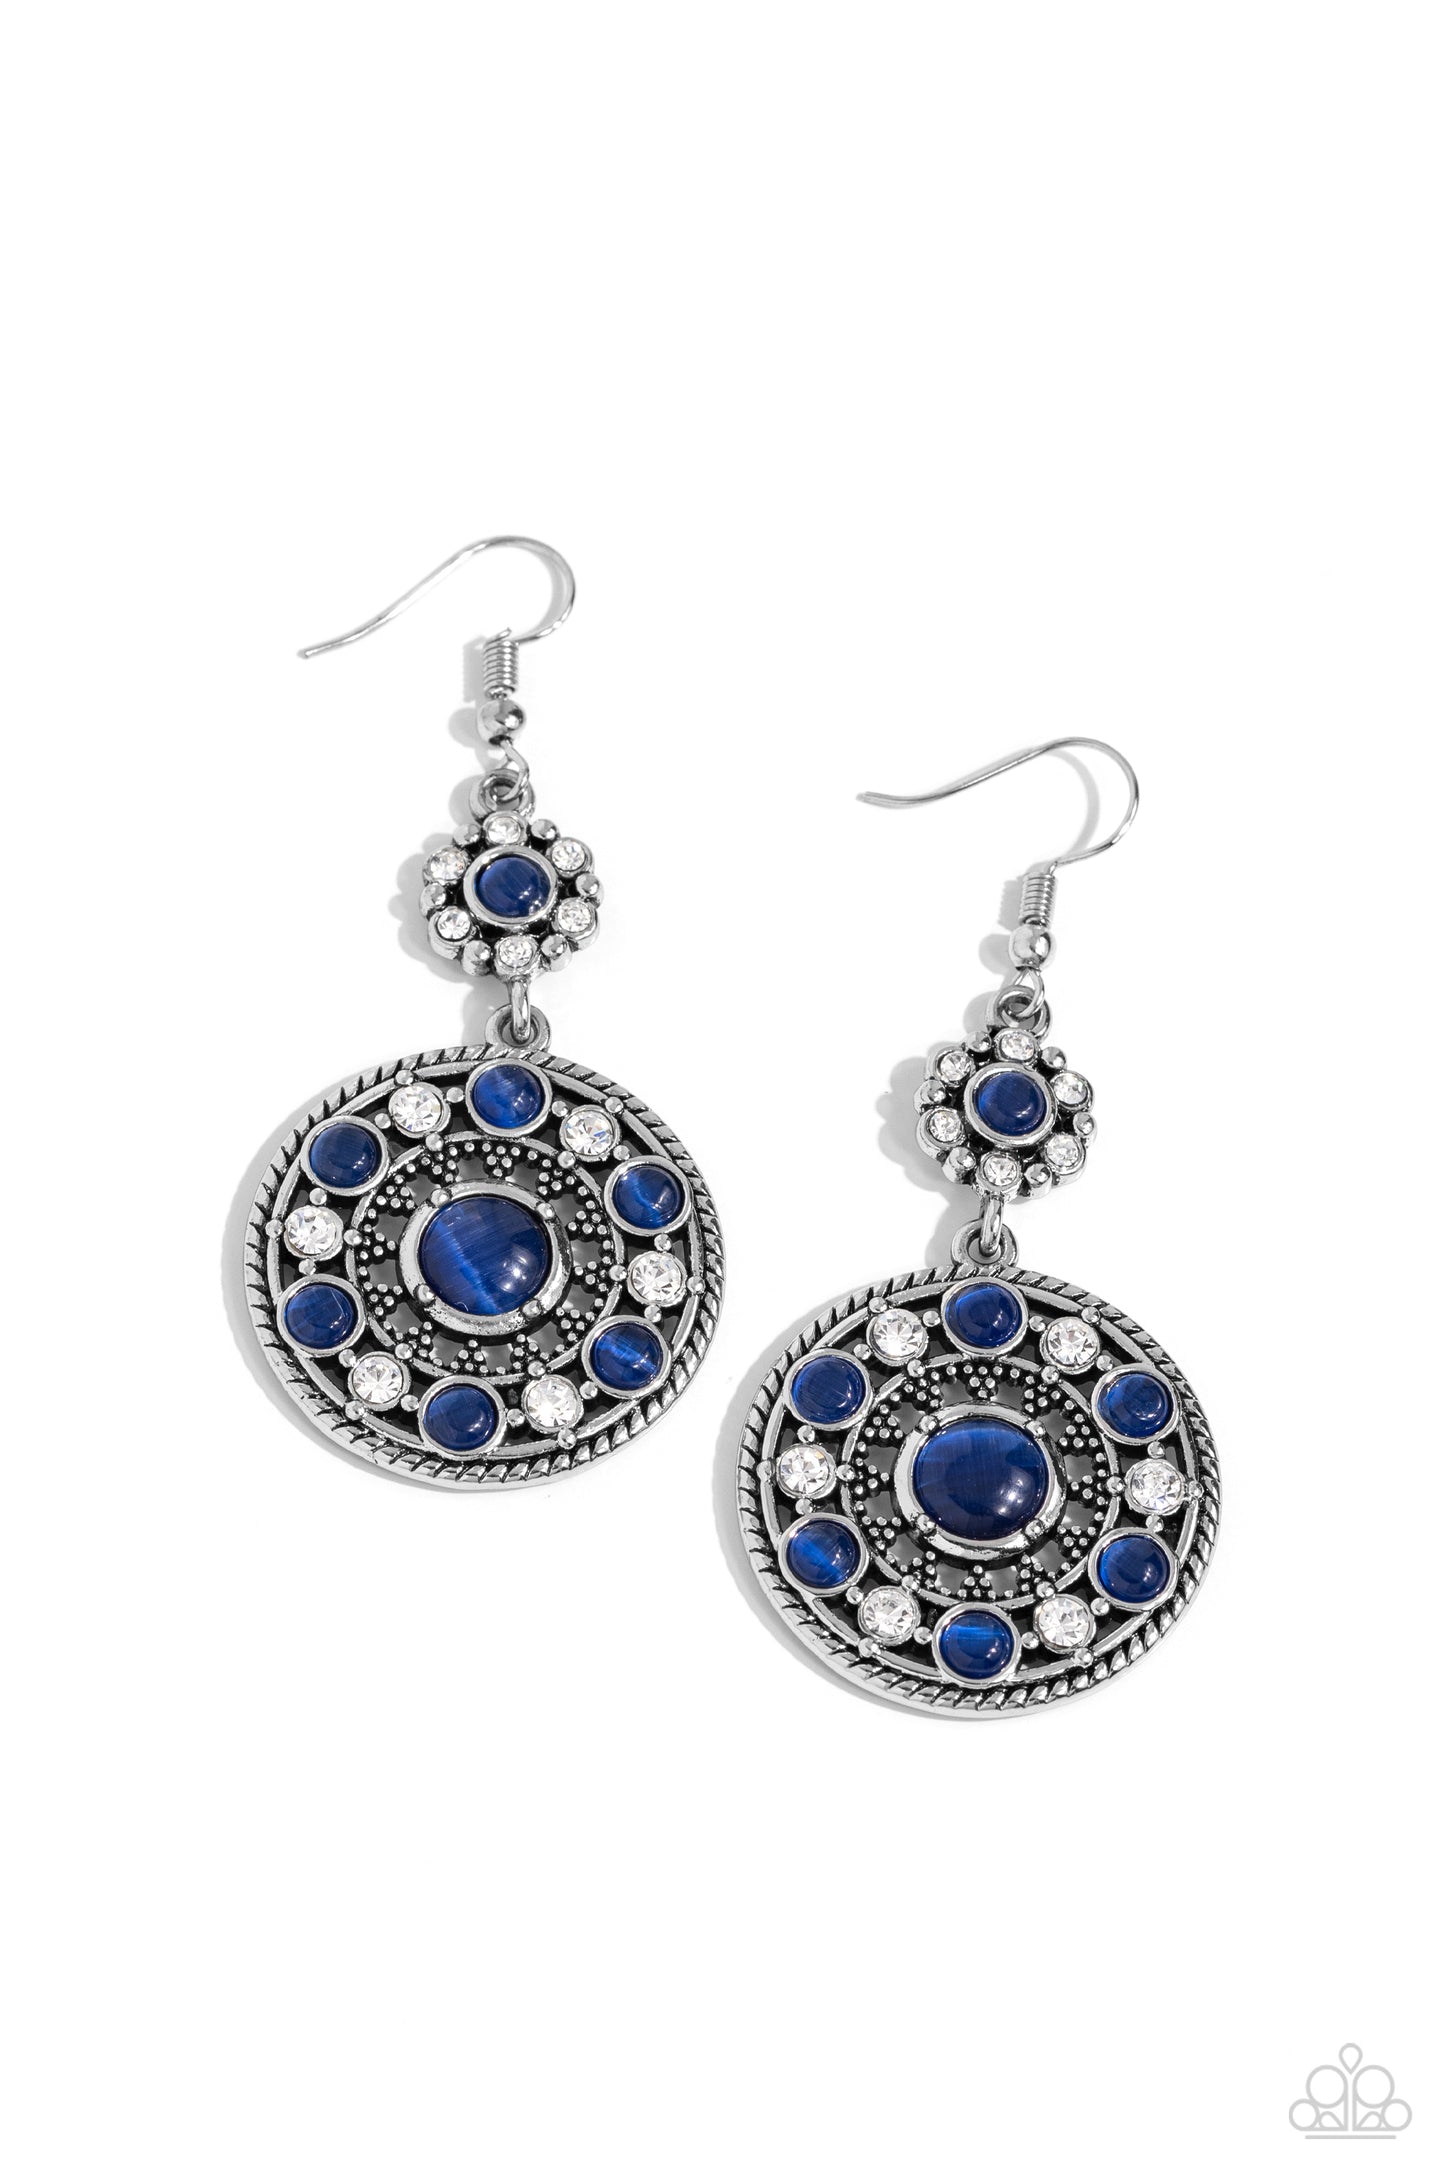 Party at My PALACE - Blue Cat's Eye Silver Circle Fishhook Earrings